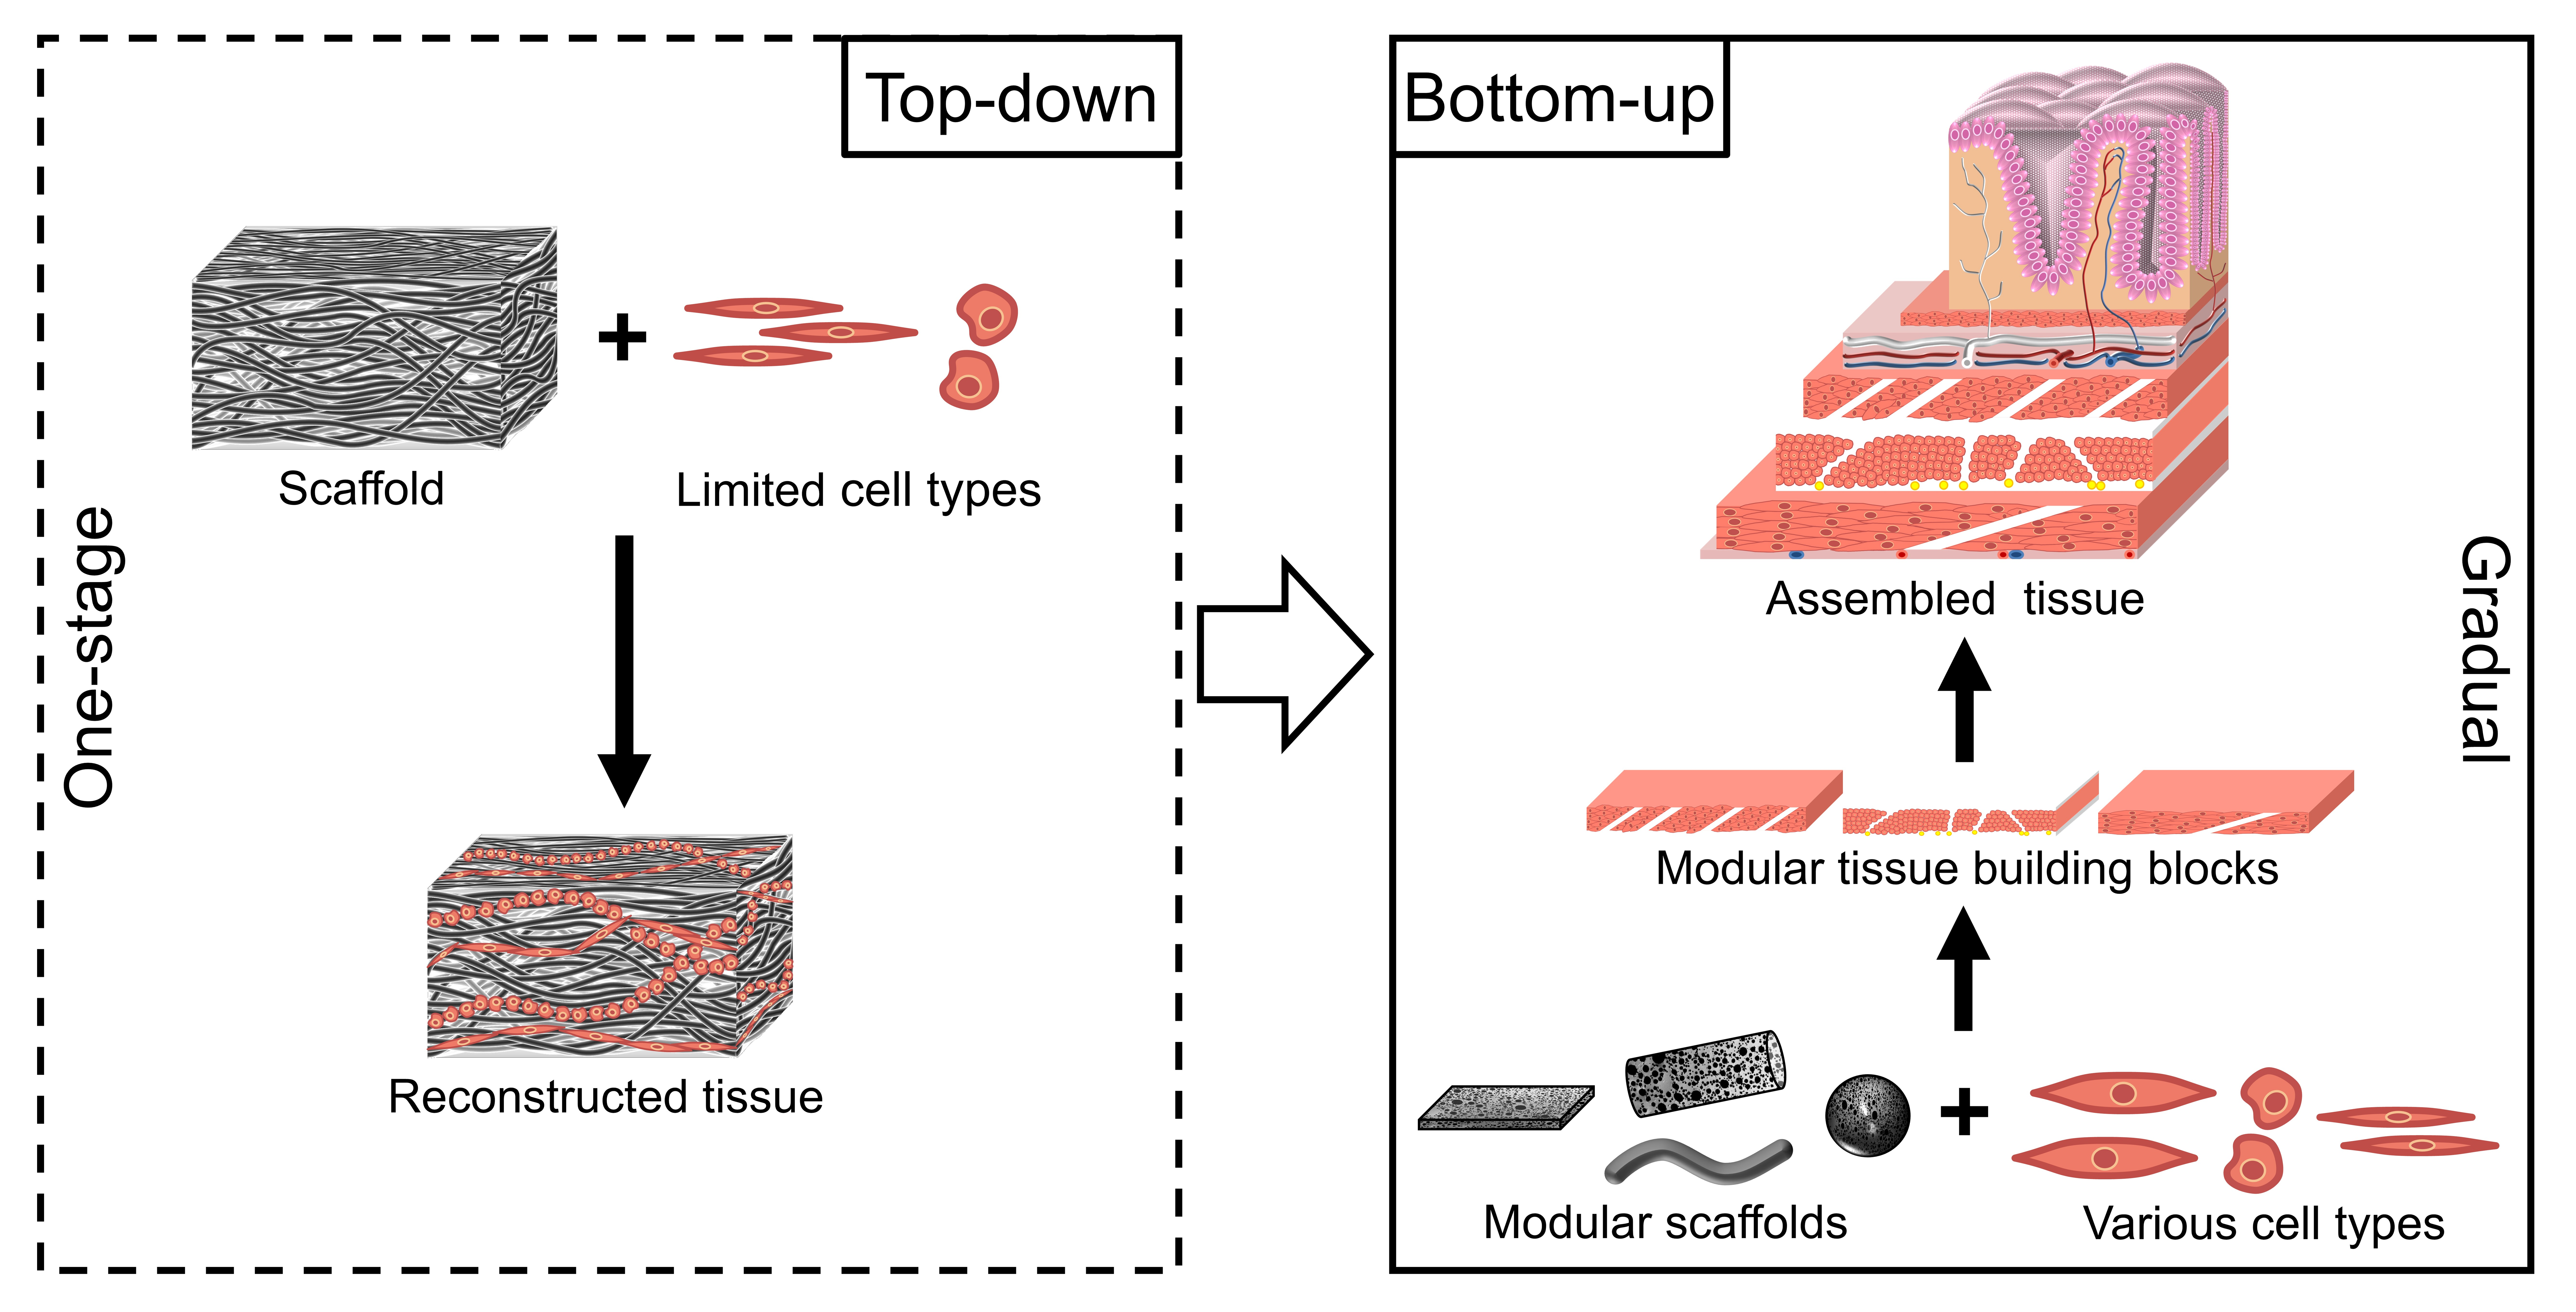 Processes | Free | Paradigm Shift in Tissue Engineering: From a to a Bottom–Up